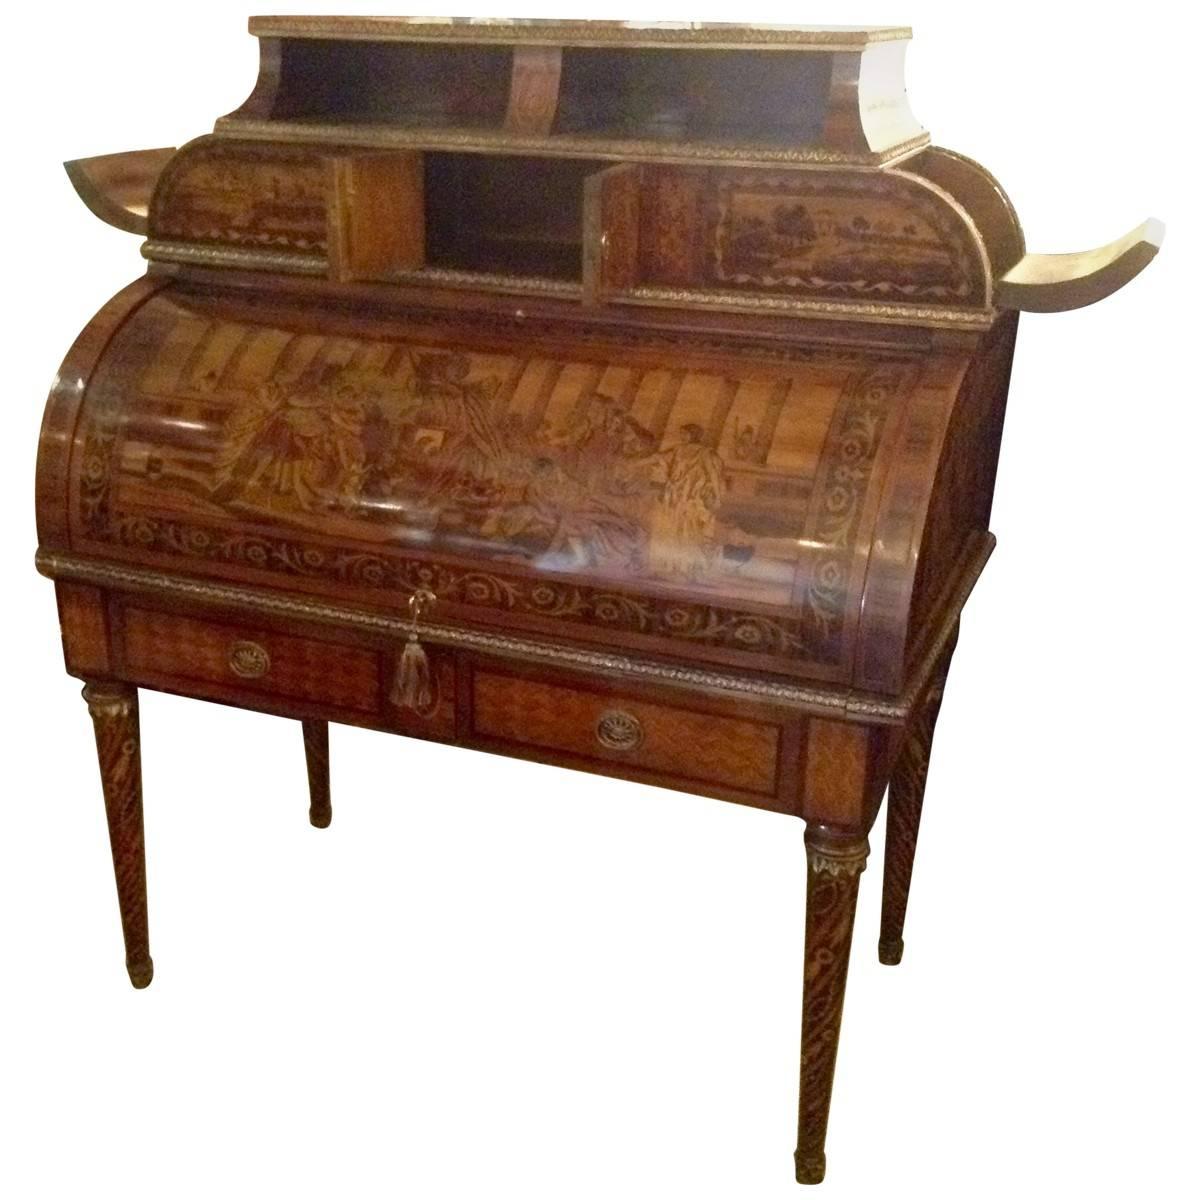 This antique secretary desk was handcrafted from precious mahogany in a neoclassical style in Italy during the early 20th century. Its beautifully glossy hardwood body is elaborately inlaid with a variety of other woods, including ebony, that create